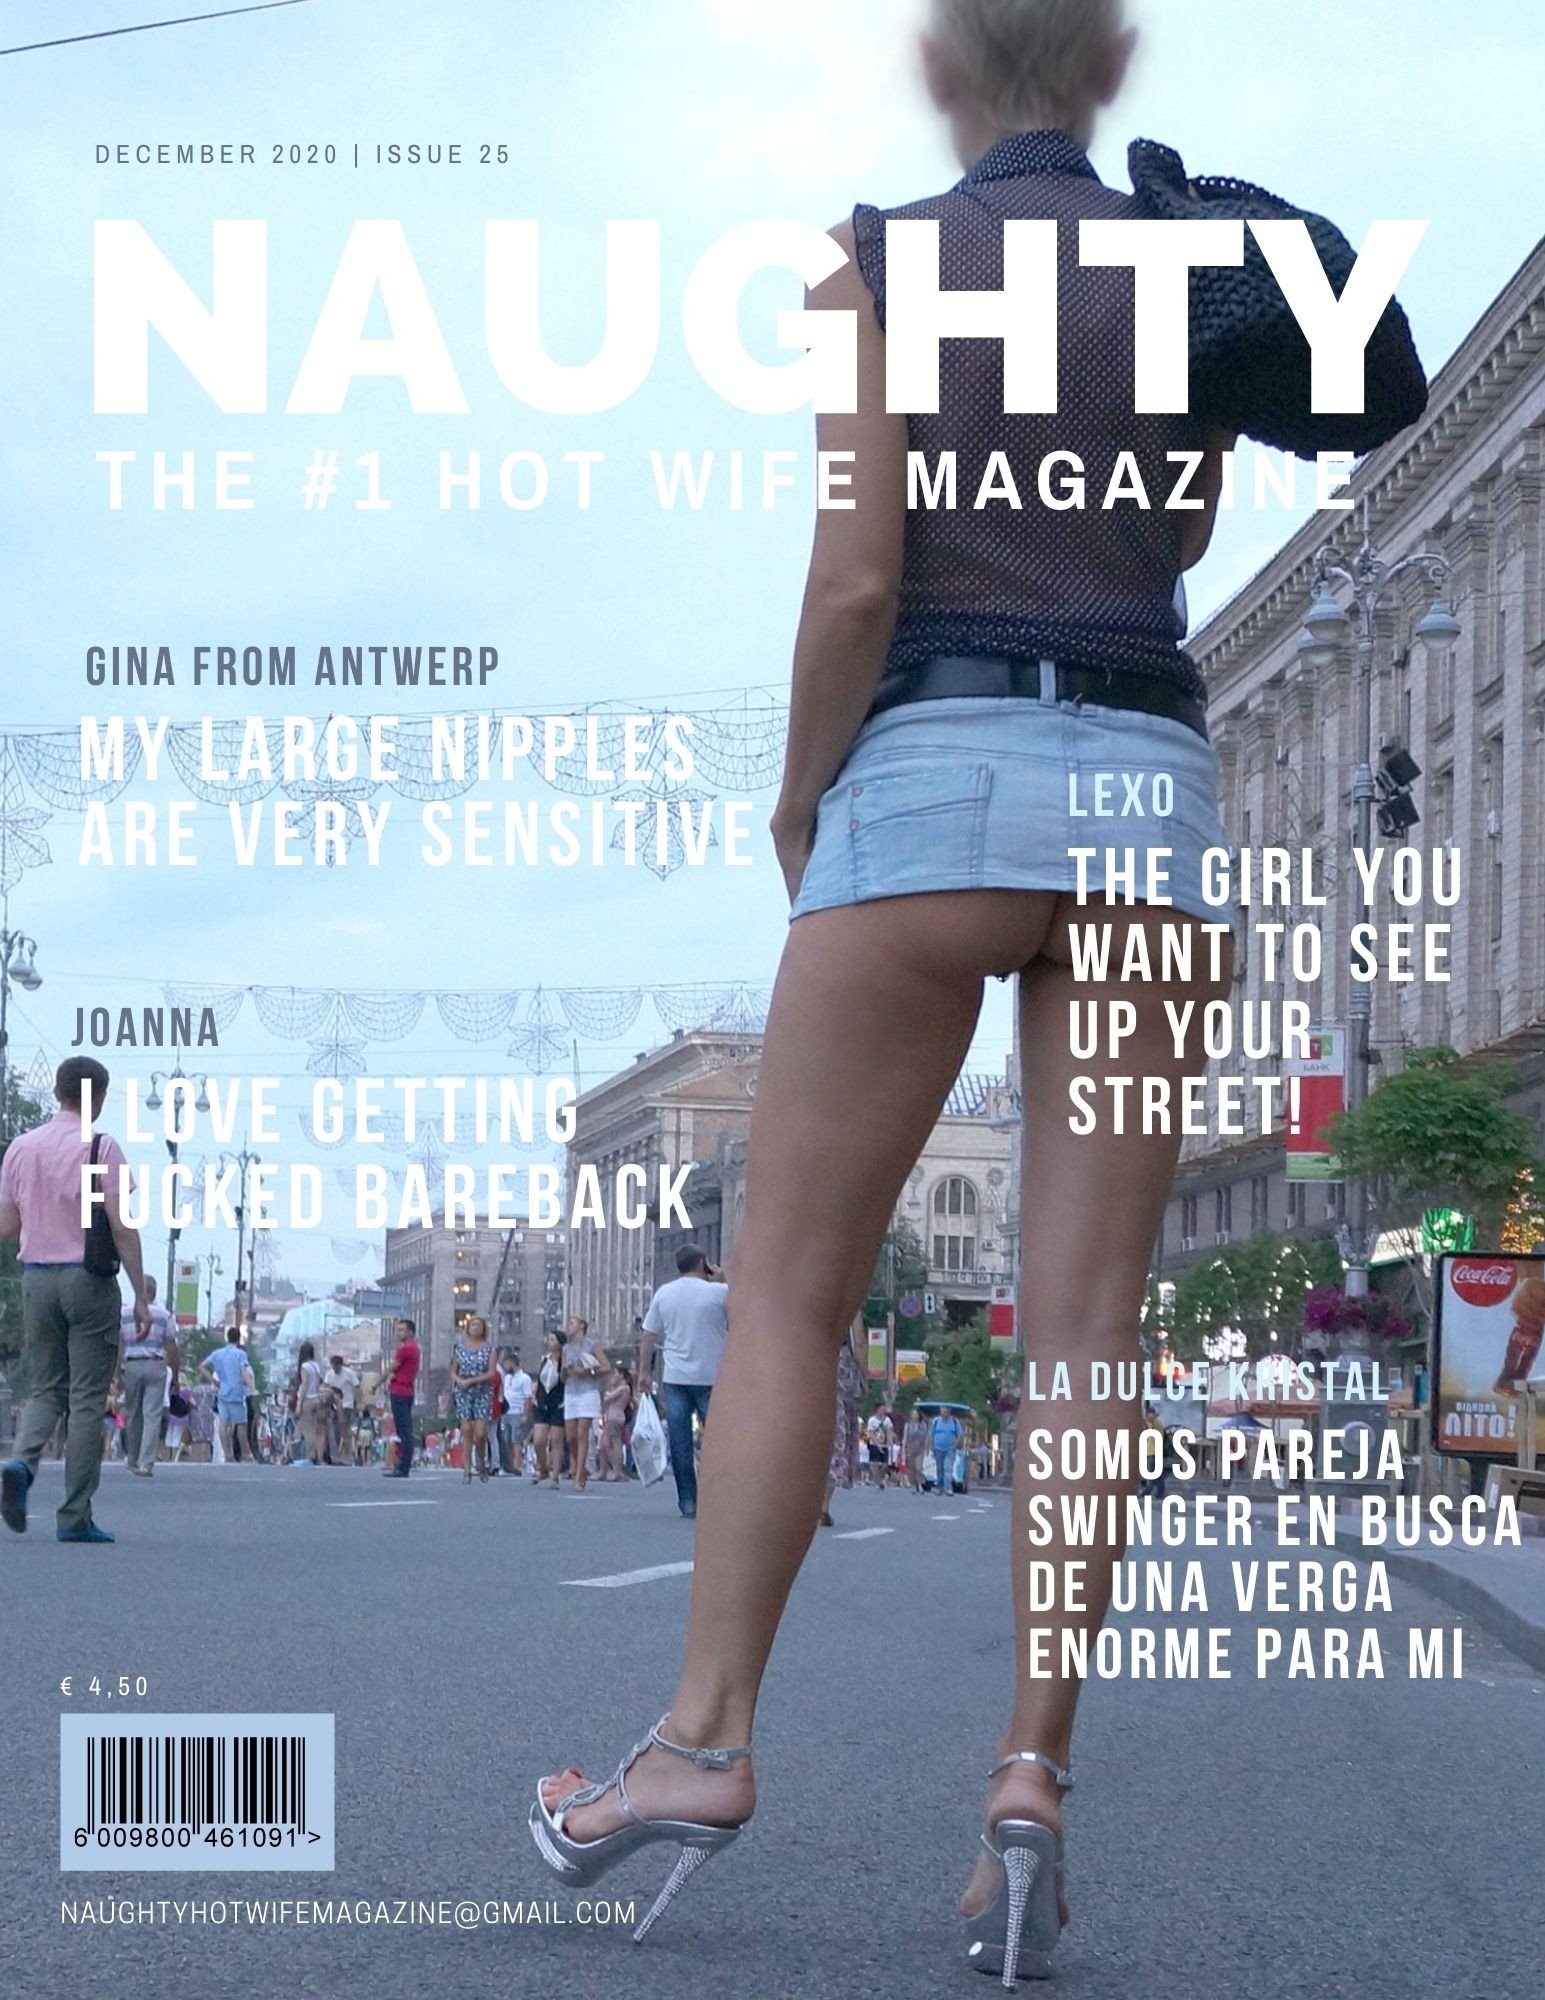 Photo by NaughtyMagazine with the username @NaughtyMagazine,  November 1, 2020 at 9:13 AM. The post is about the topic Naughty Slut Wife Magazine and the text says 'Do you wanna expose yourslef in Naughty Hot Wife Magazine? Contact me: naughtyhotwifemagazine@gmail.com'